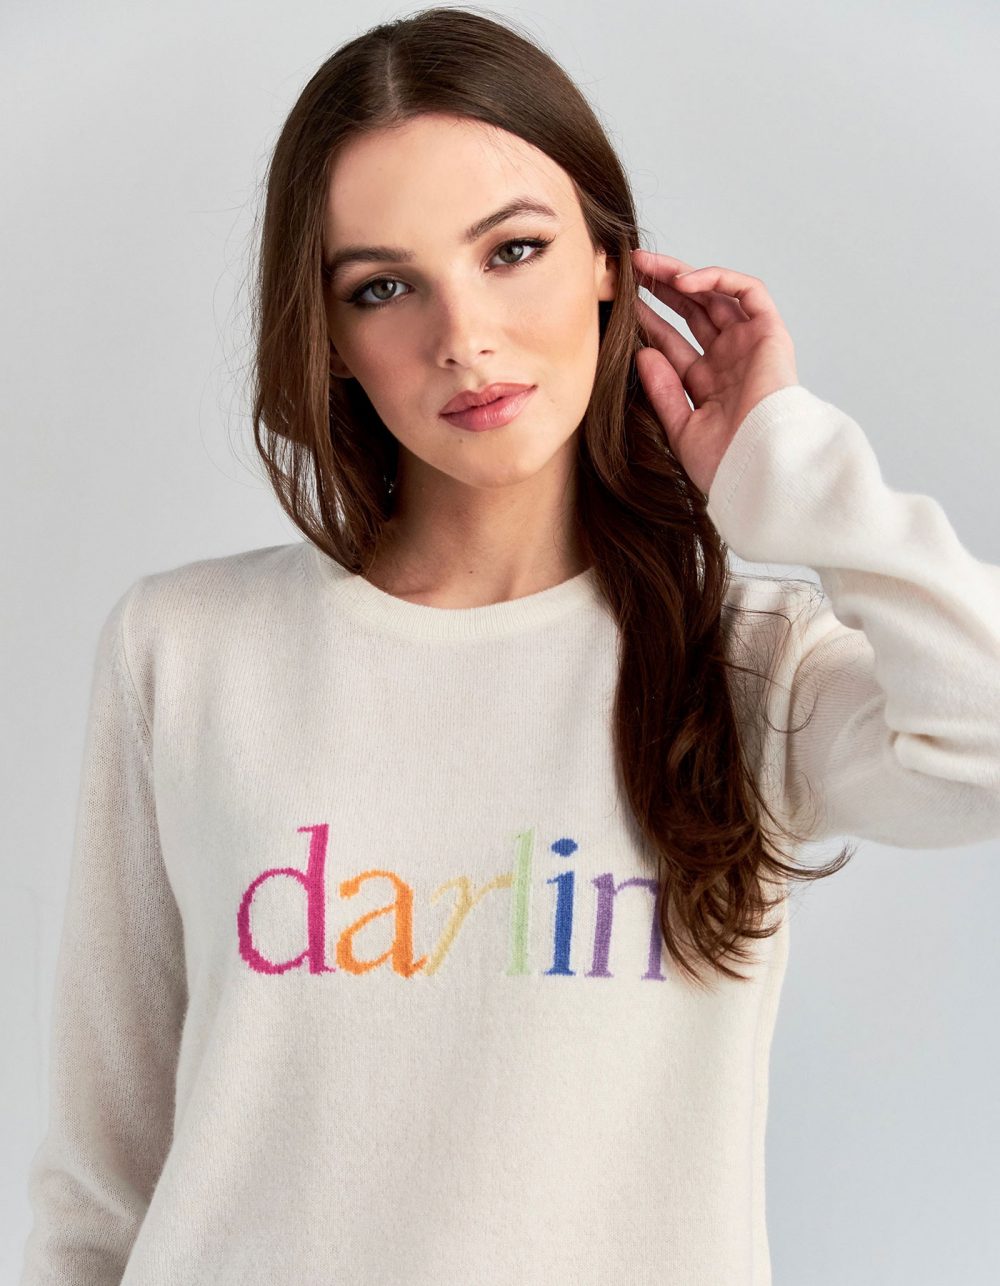 A model wearing darlin pastel cashmere knitwear, one of the signature styles in malin darlin womens jumpers.